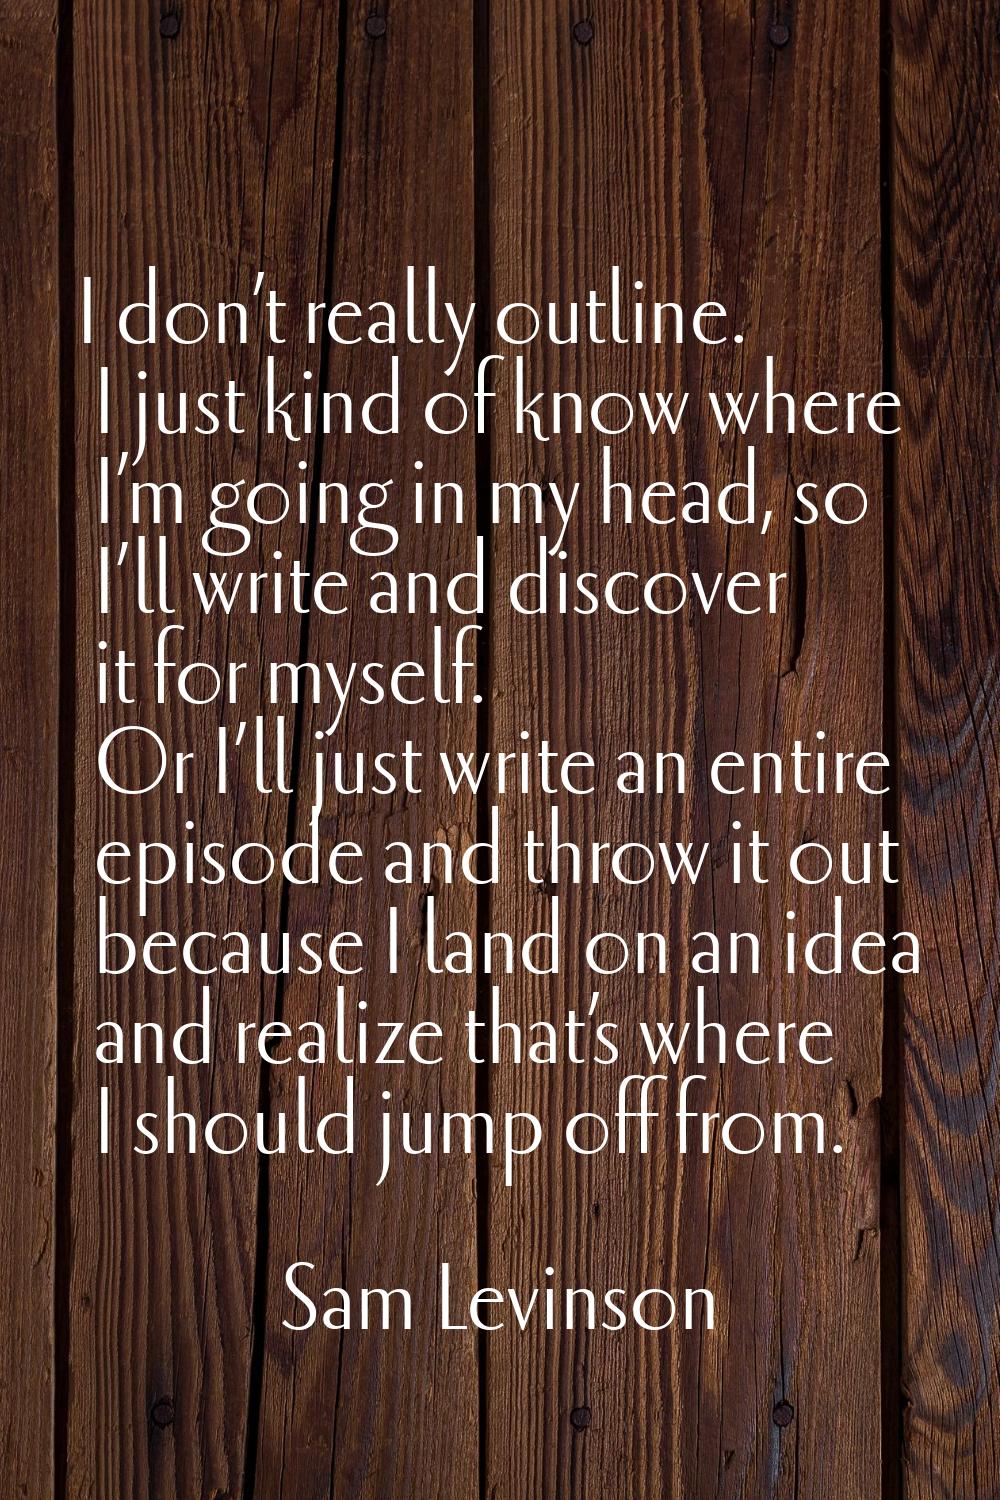 I don’t really outline. I just kind of know where I’m going in my head, so I’ll write and discover 